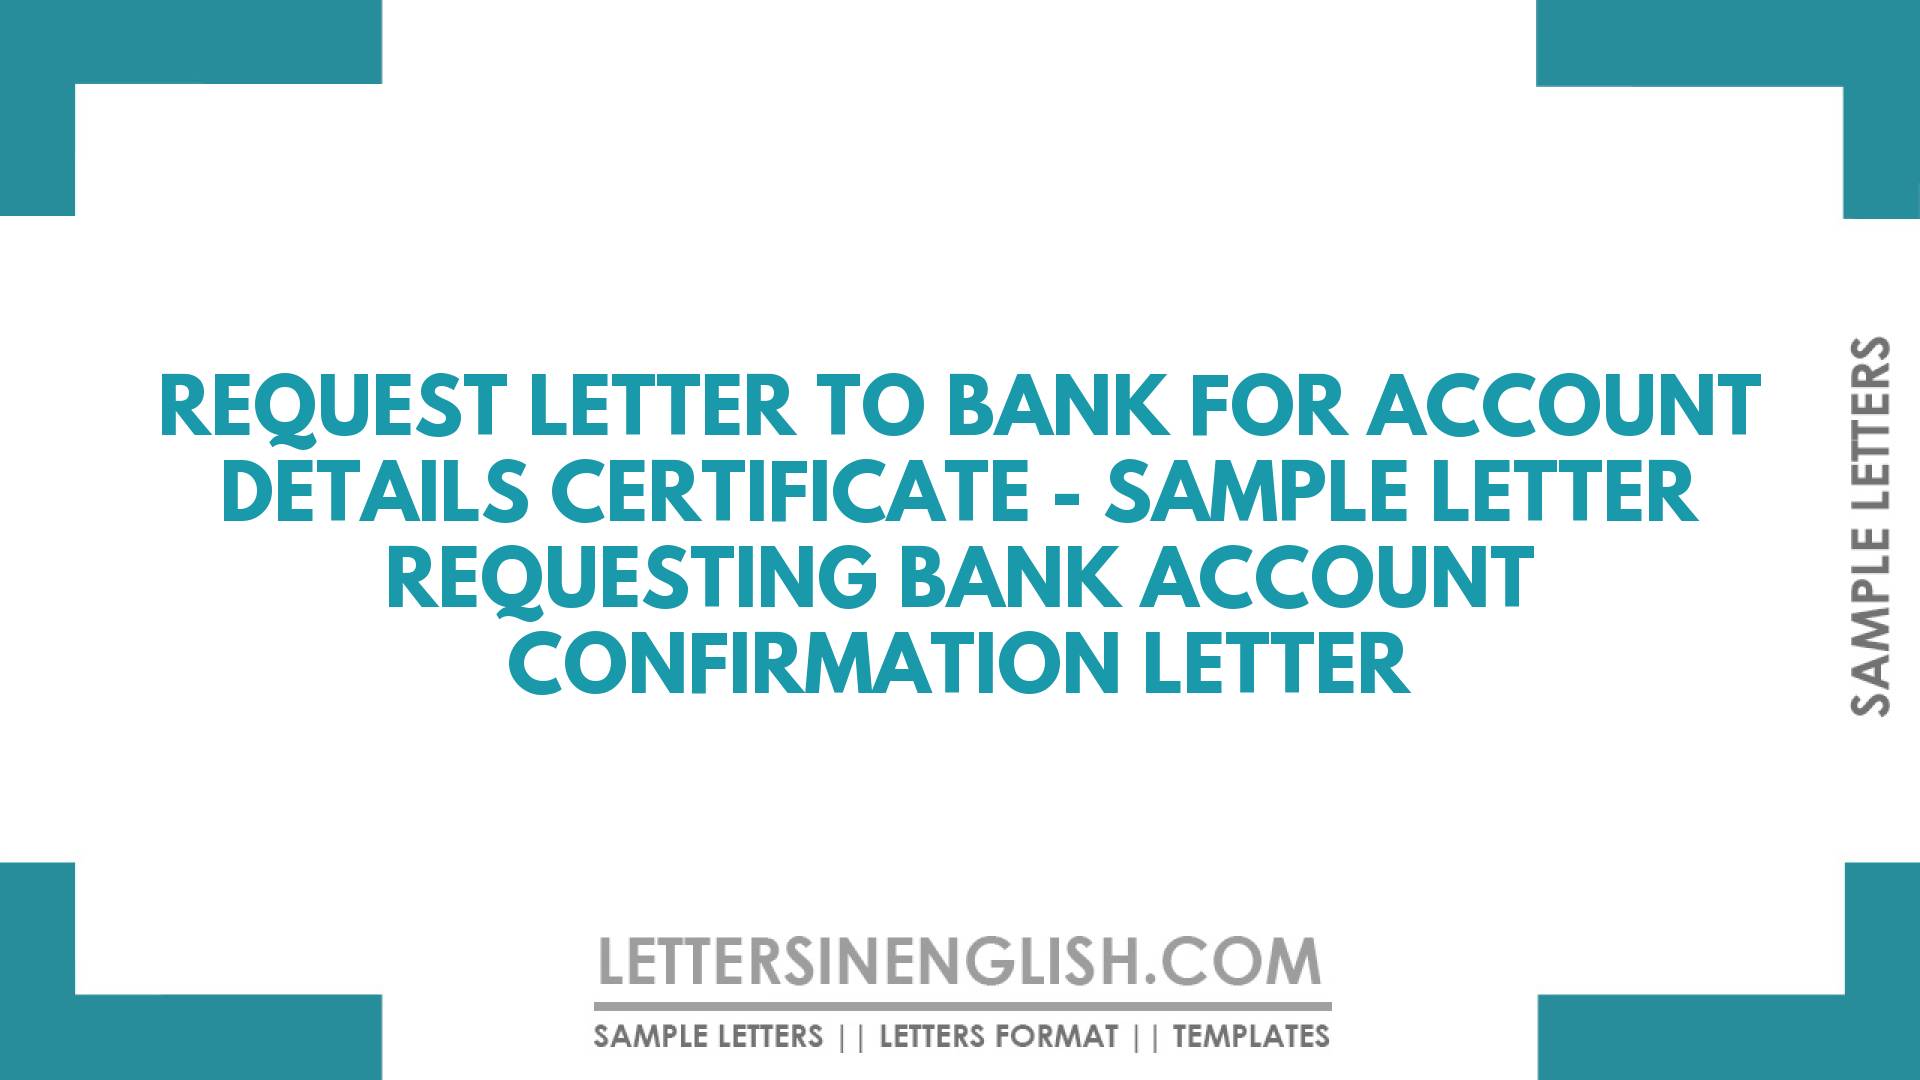 Request Letter to Bank for Account Details Certificate – Sample Letter Requesting Bank Account Confirmation Letter